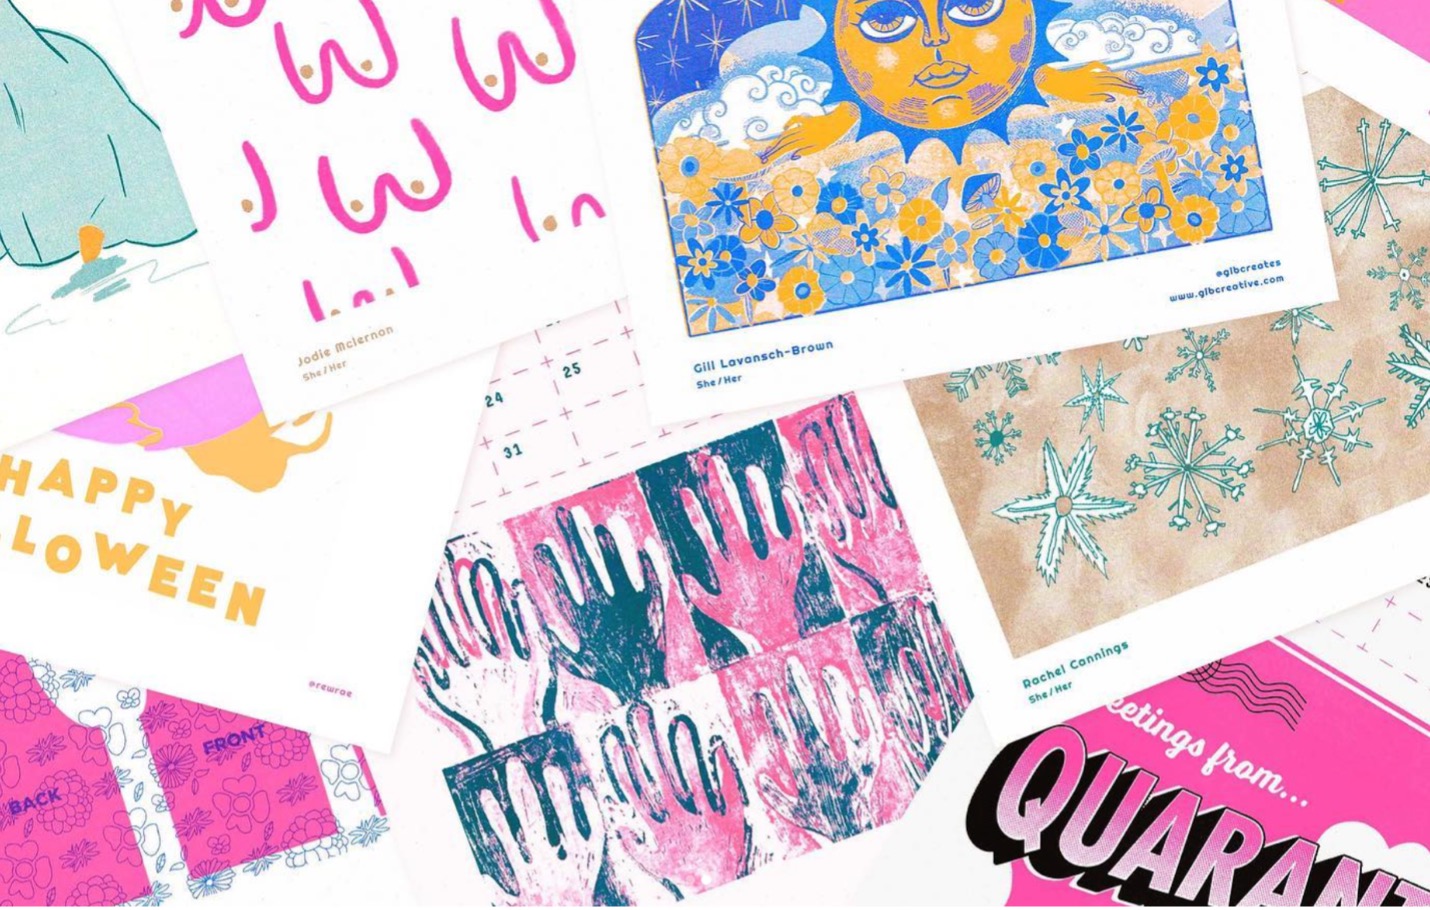 Some example of risograph prints from Wild Press.